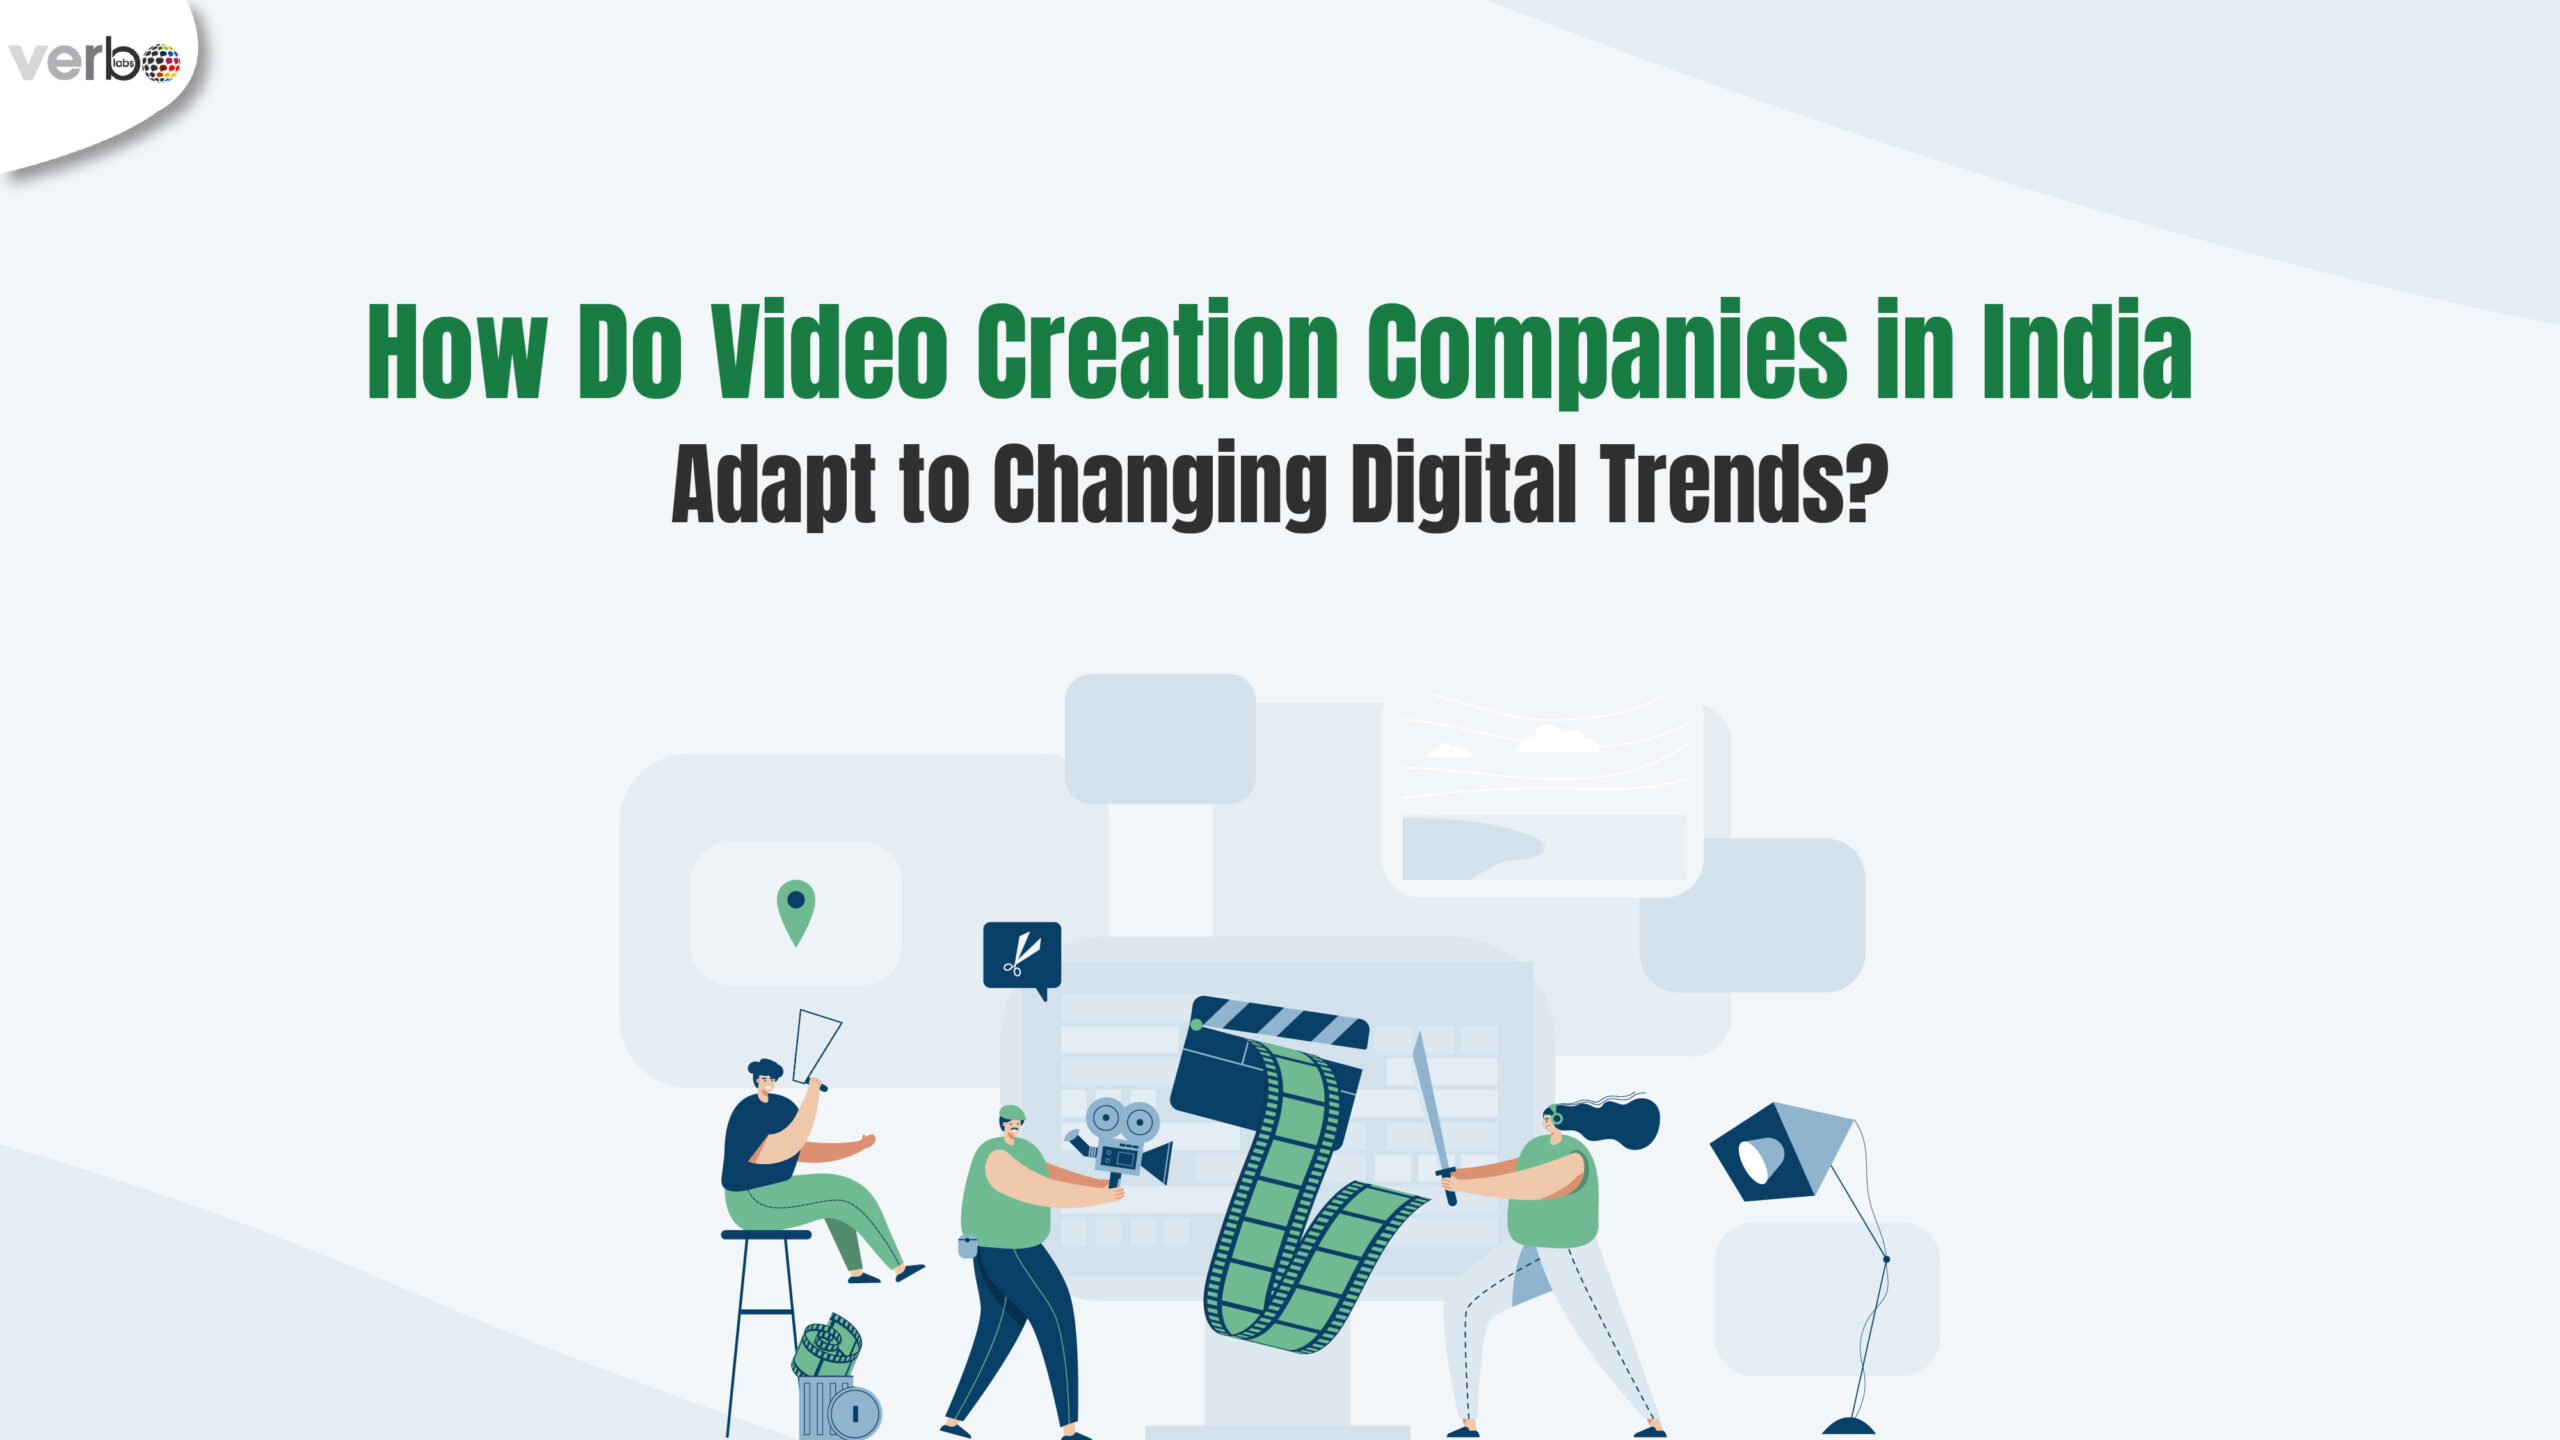 How do video creation companies in India adapt to changing digital trends scaled